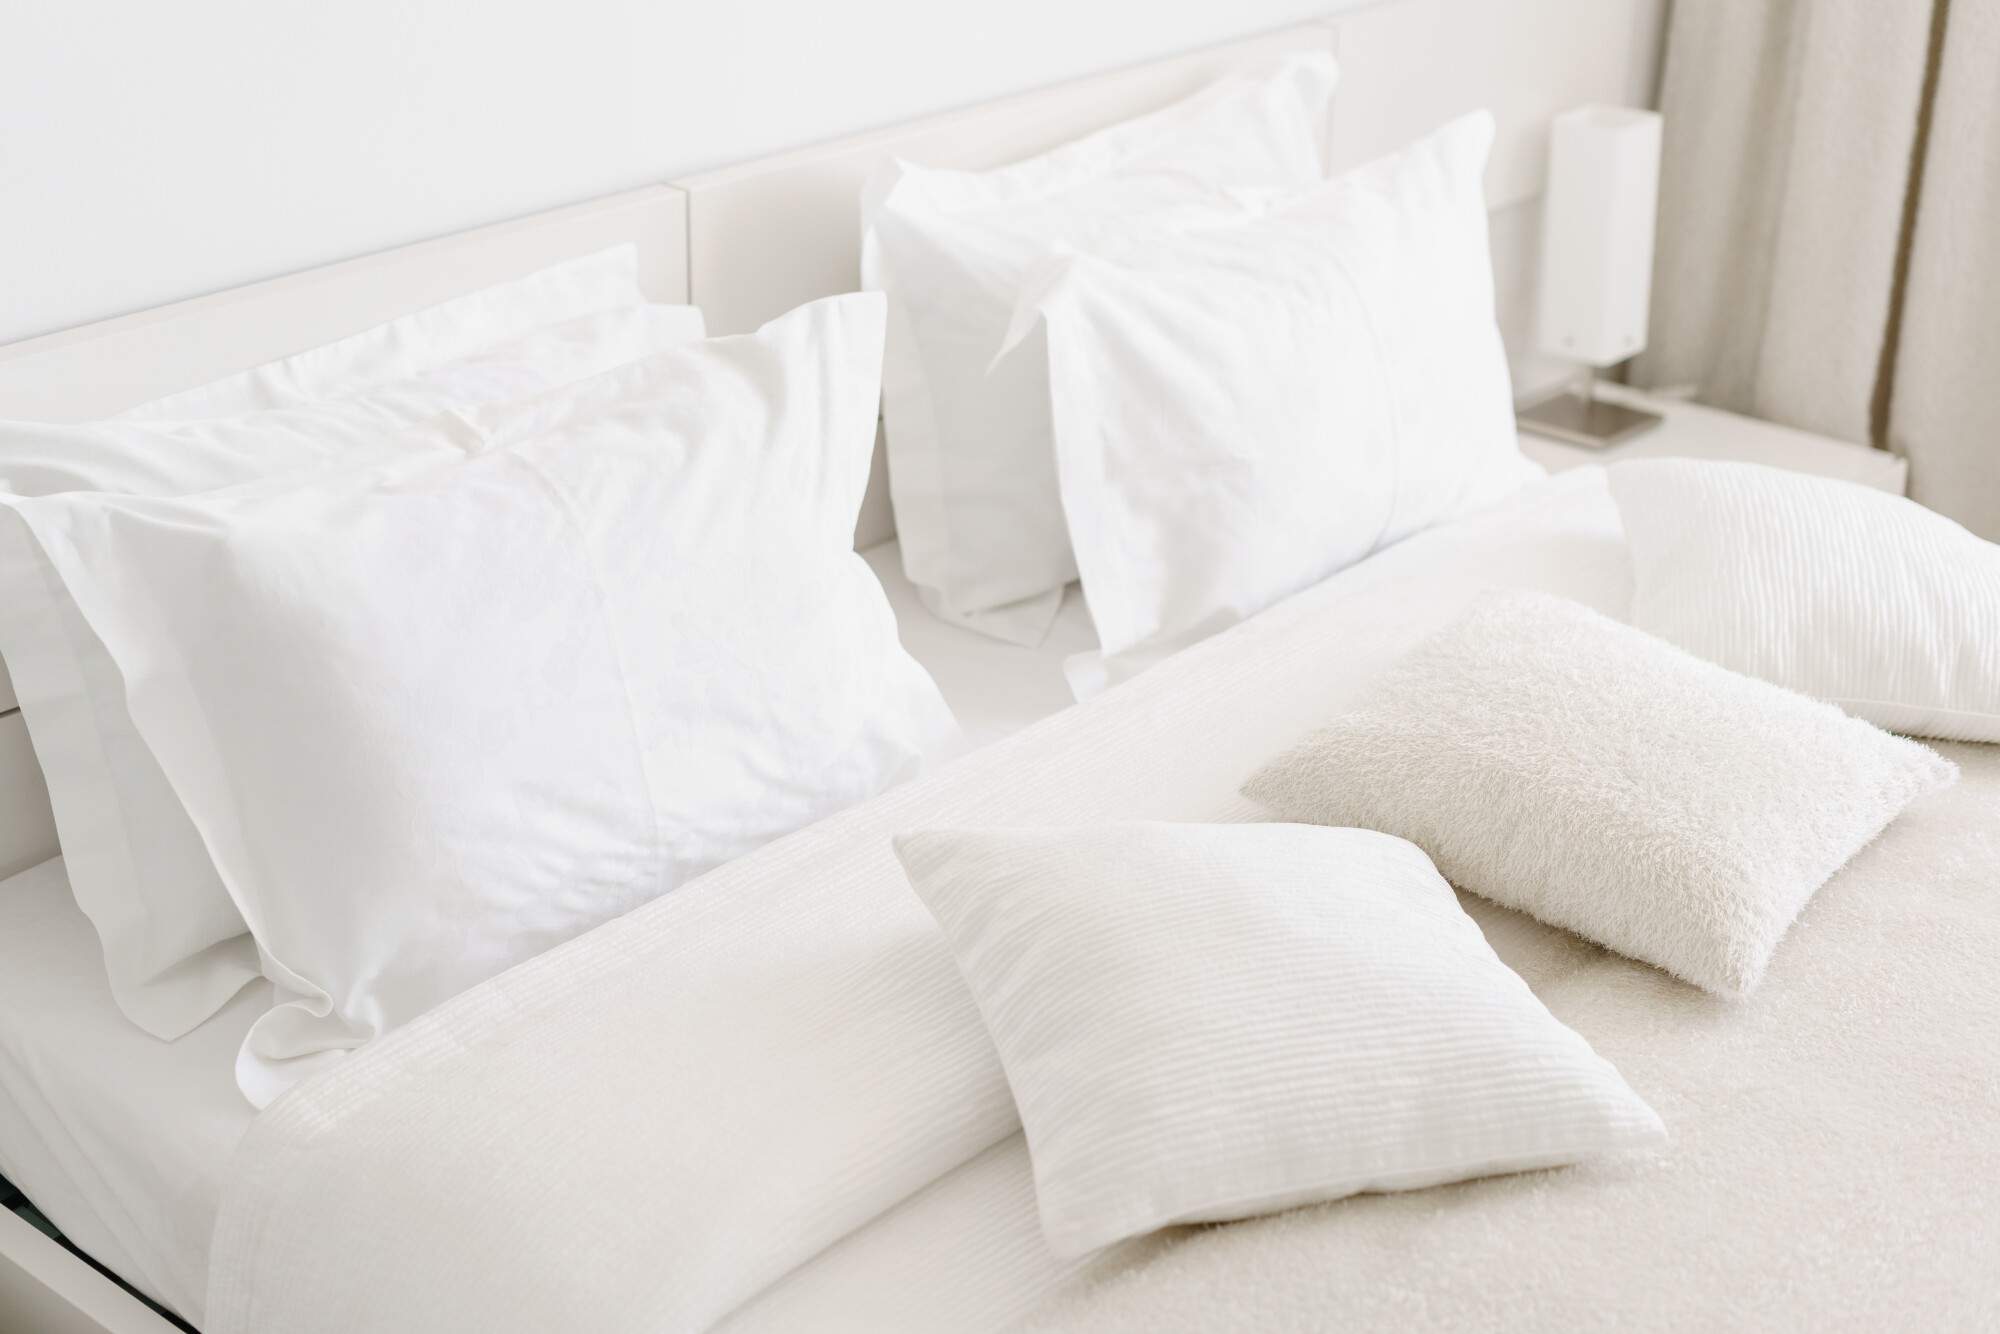 What Are the Different Types of Pillows That Are Used Today?